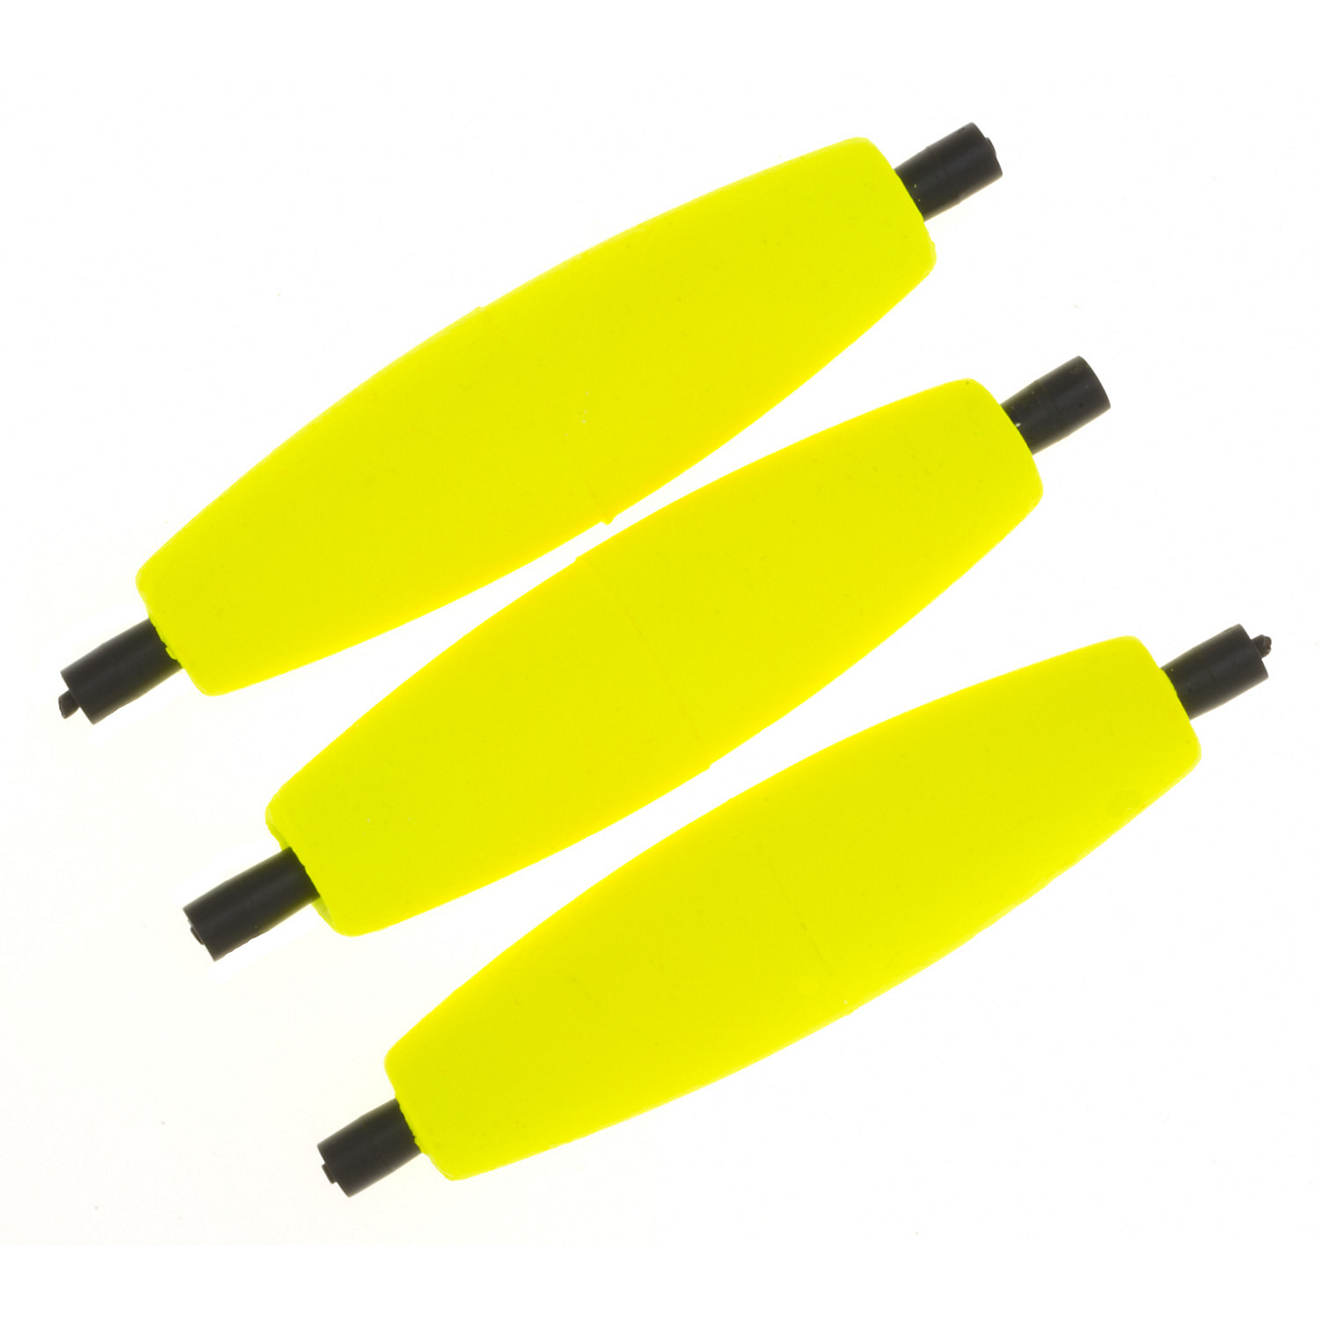 Comal Tackle 3 Slotted Peg Floats 3-Pack